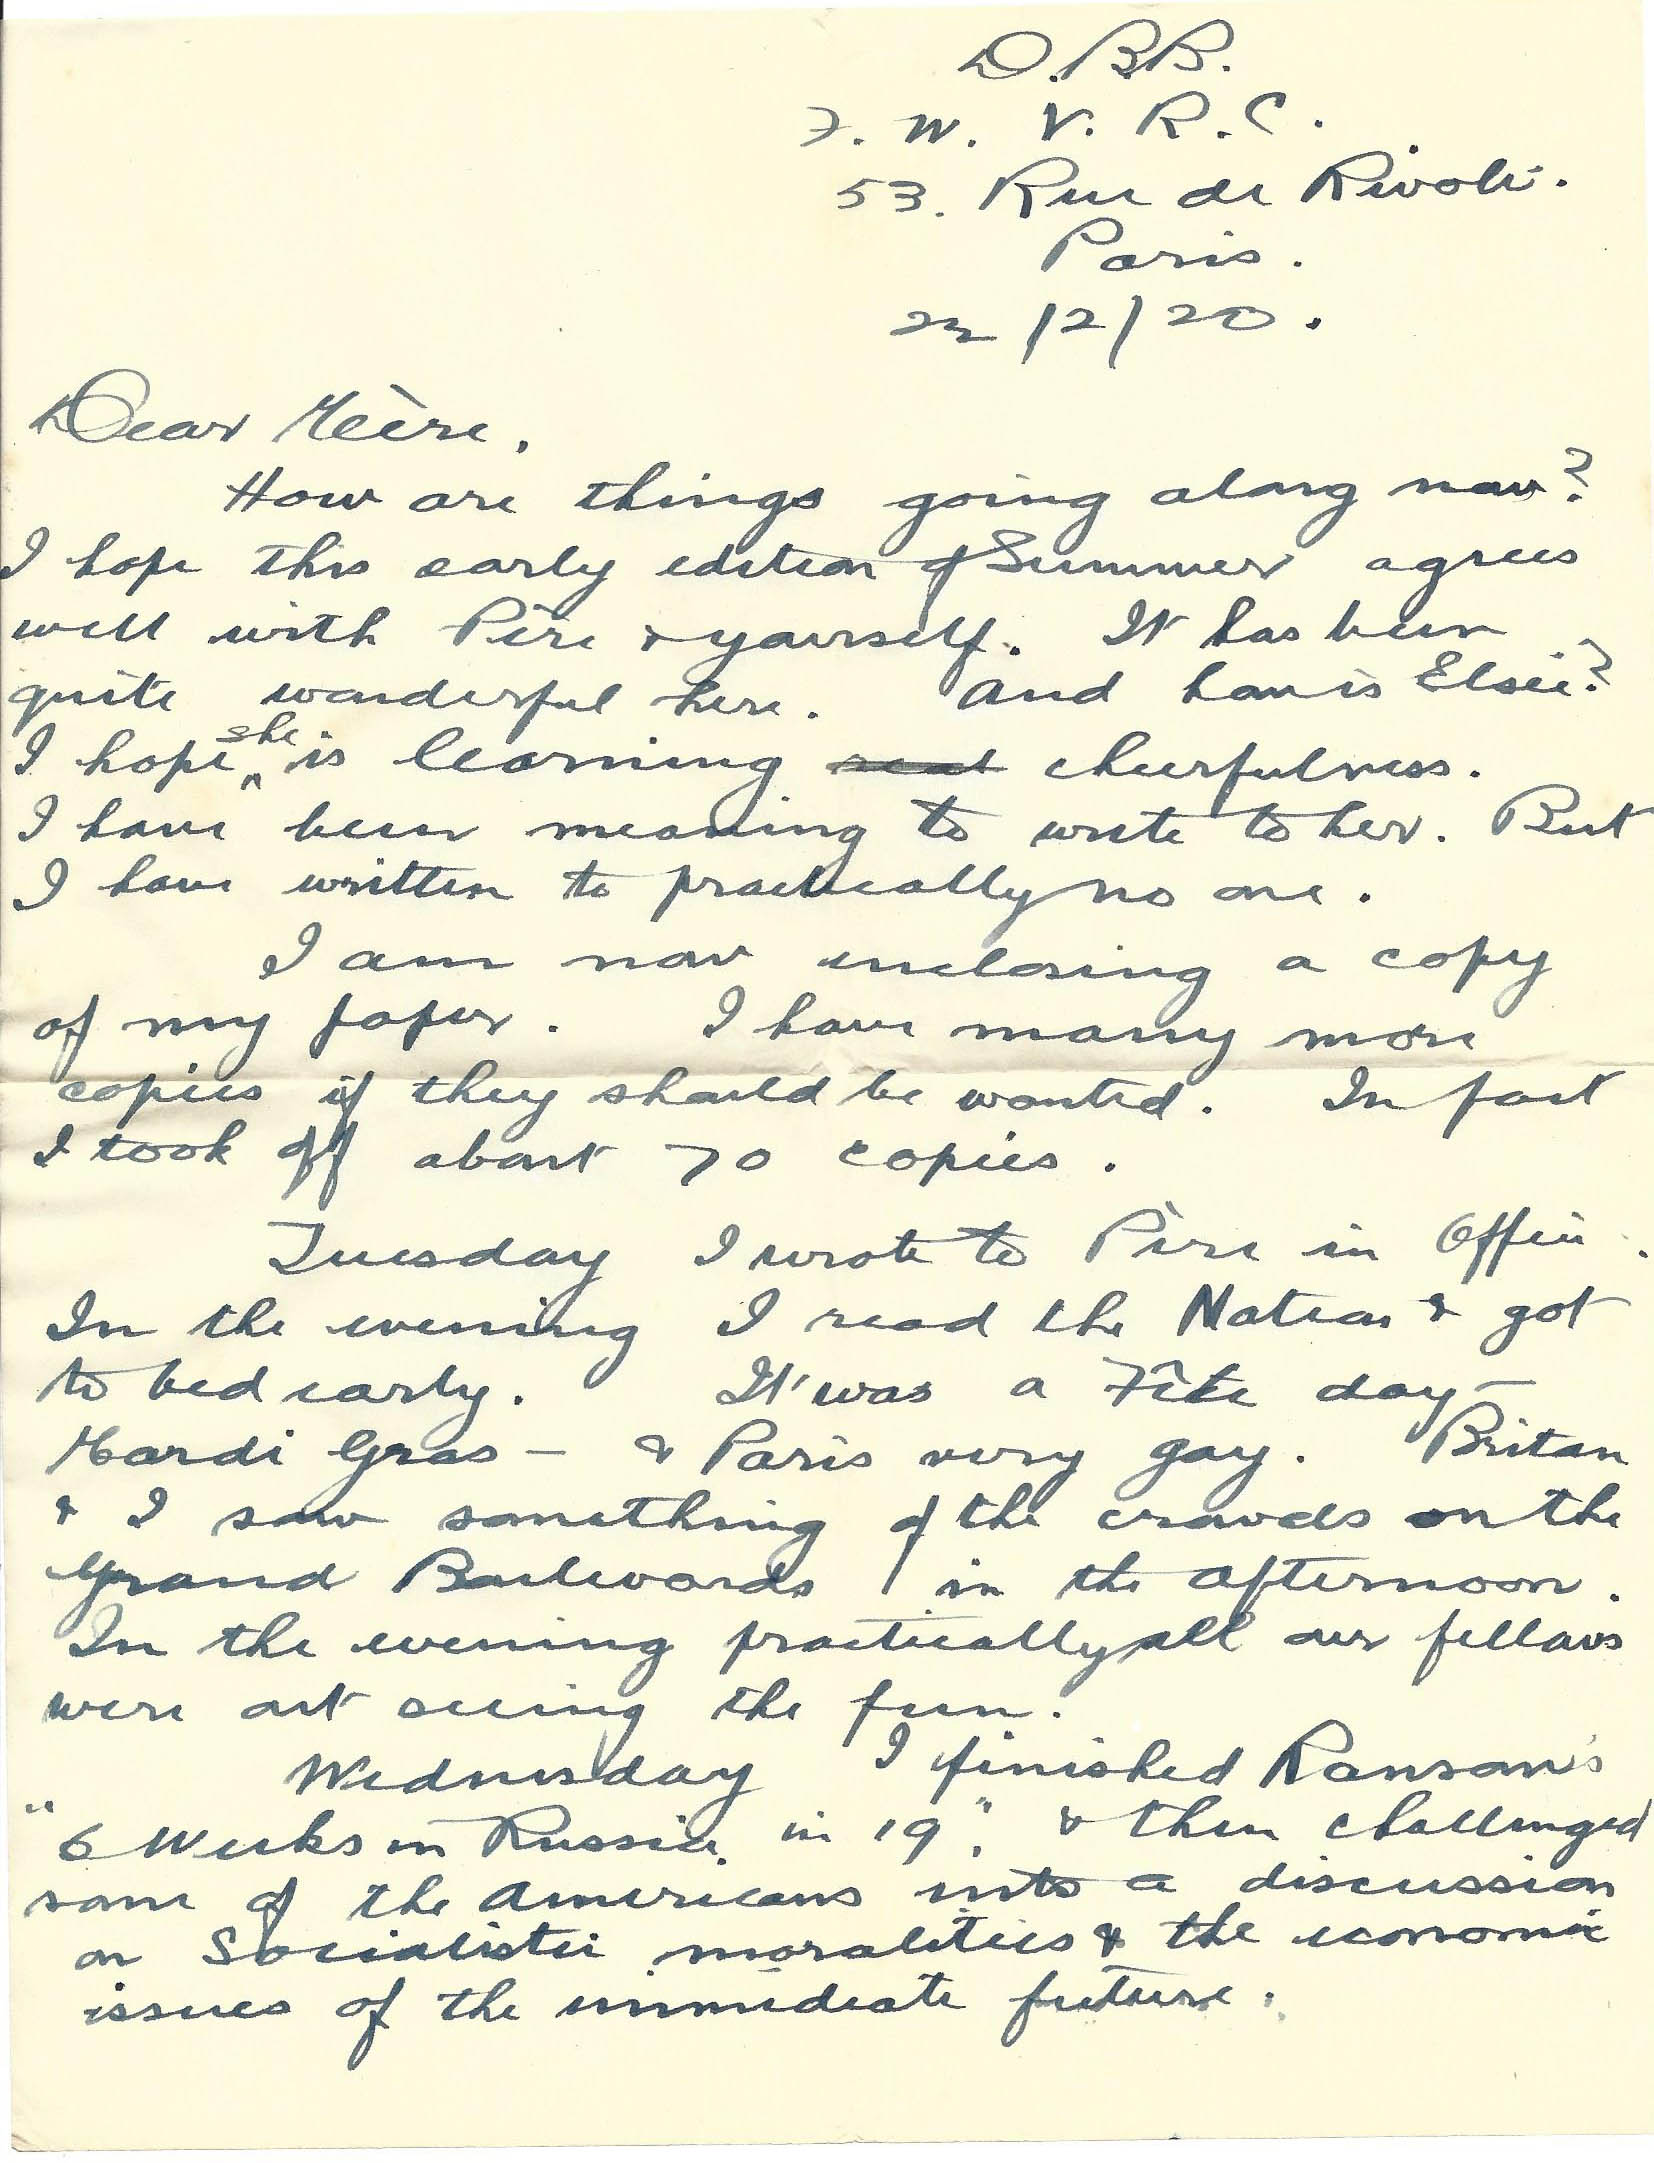 1920-02-22 p1 Donald Bearman letter to his father